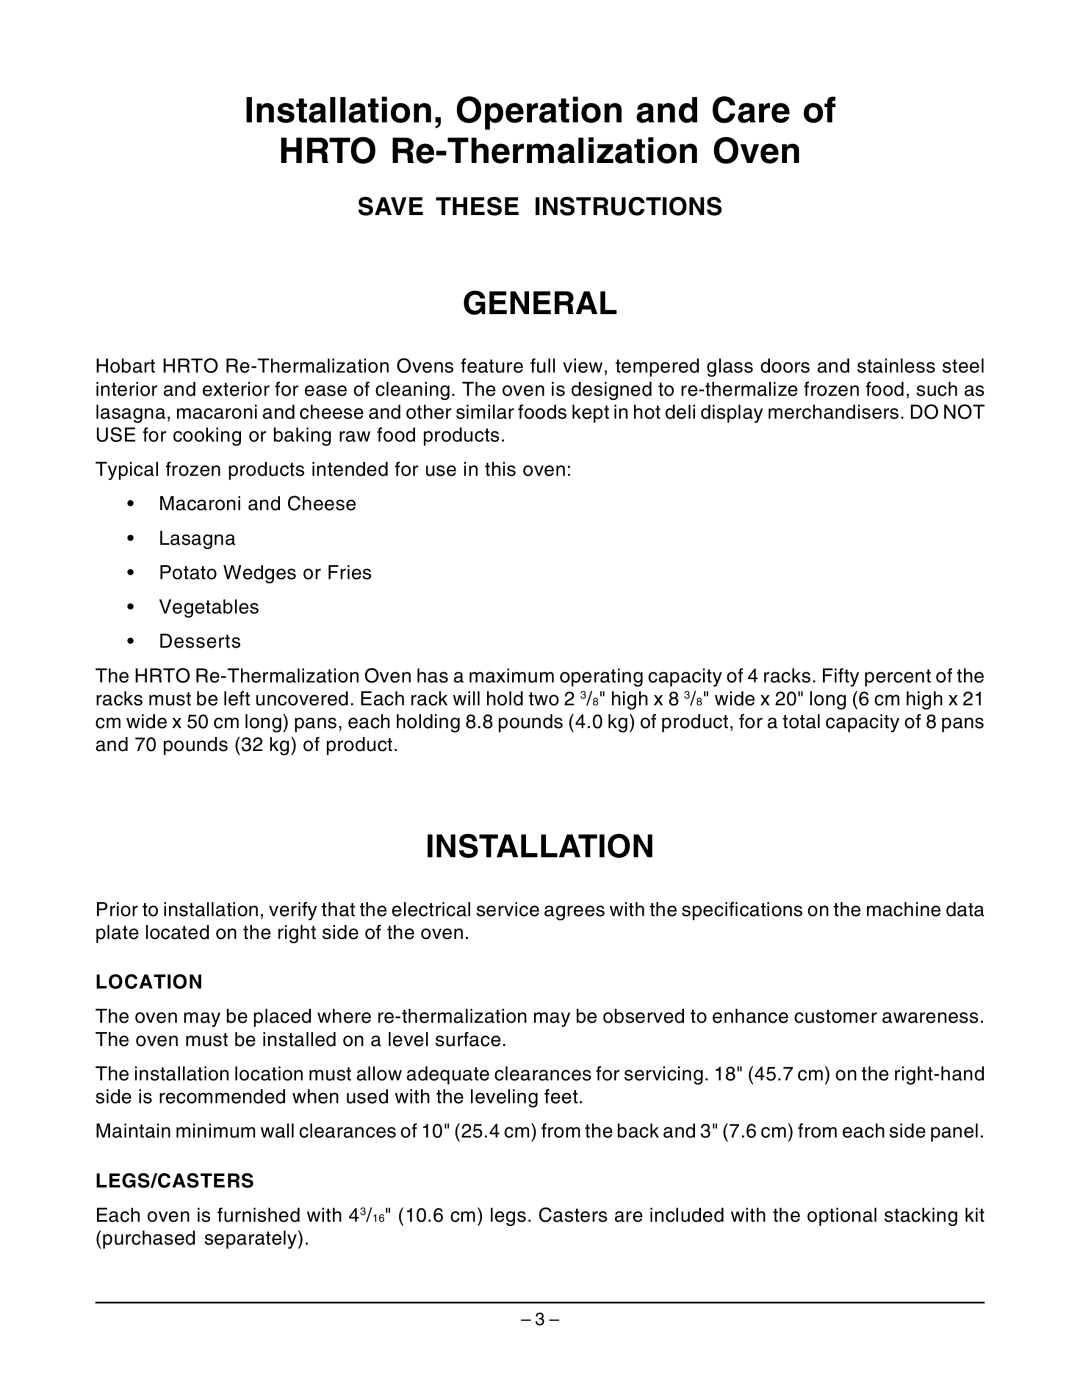 Hobart ML-132064 General, Installation, Operation and Care of, HRTO Re-ThermalizationOven, Save These Instructions 